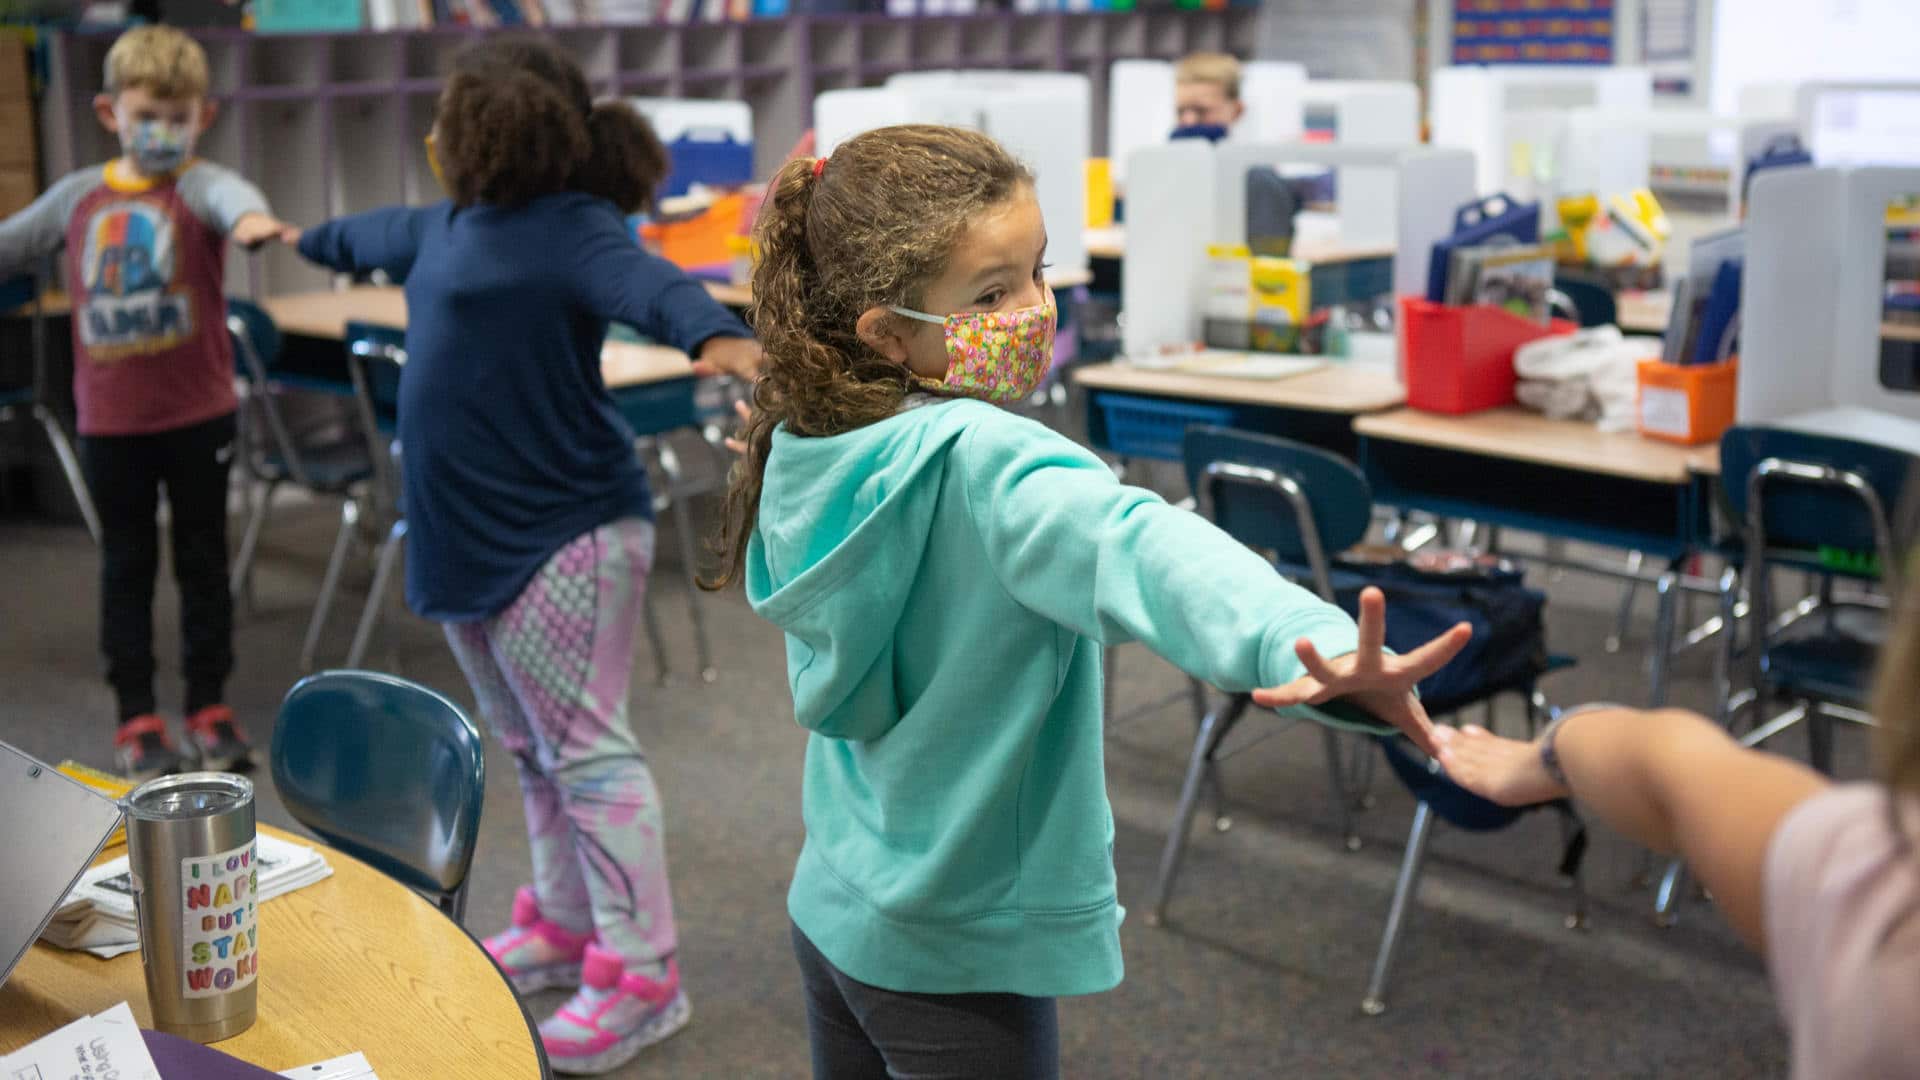 Second-grade students create distance between each other using their arms as they line up to go outside.